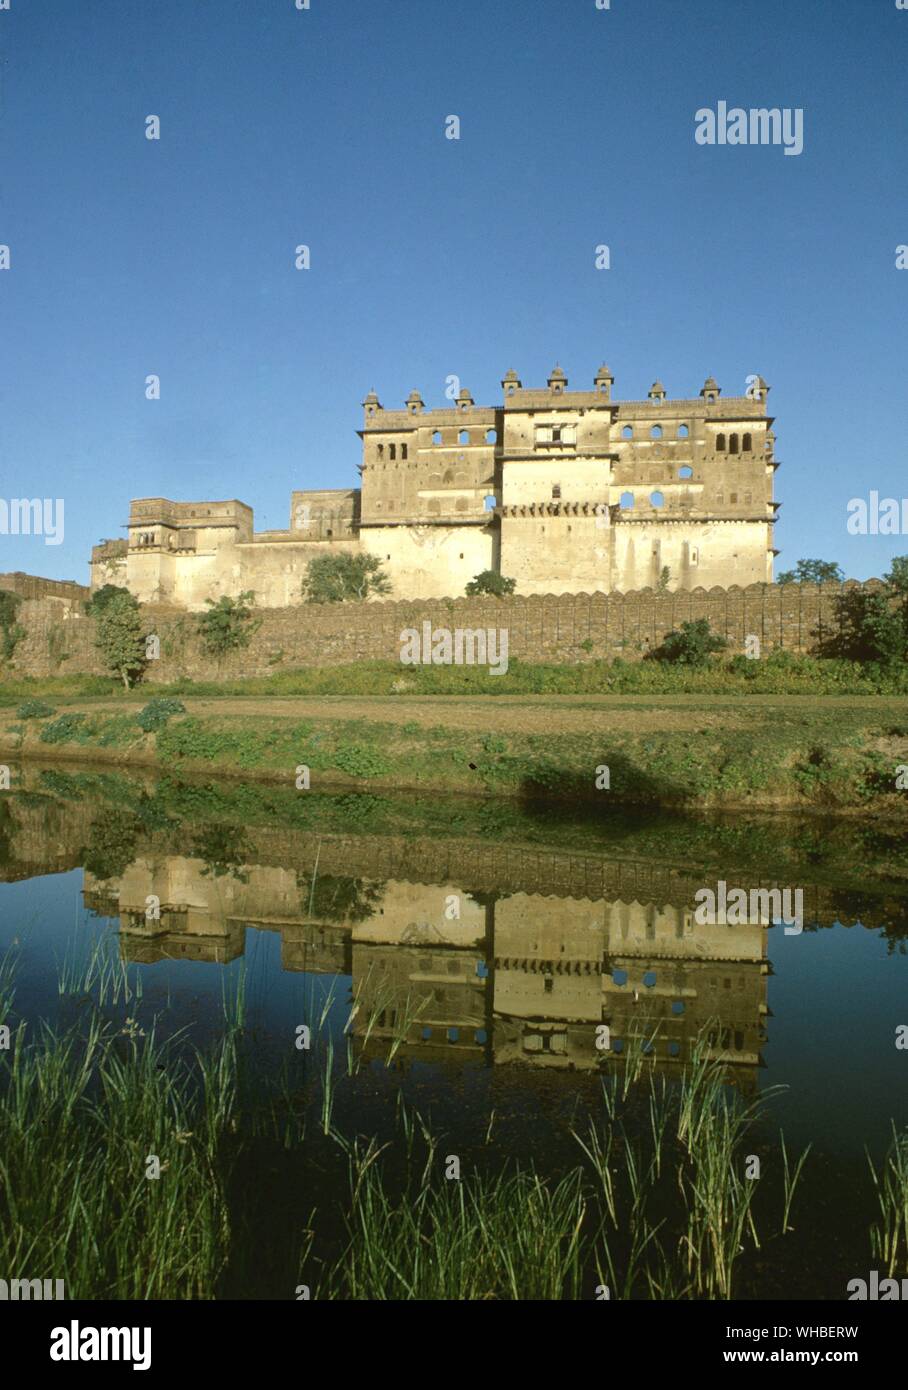 Palace Bar Singh Deo in Orchha, Indien. Stockfoto